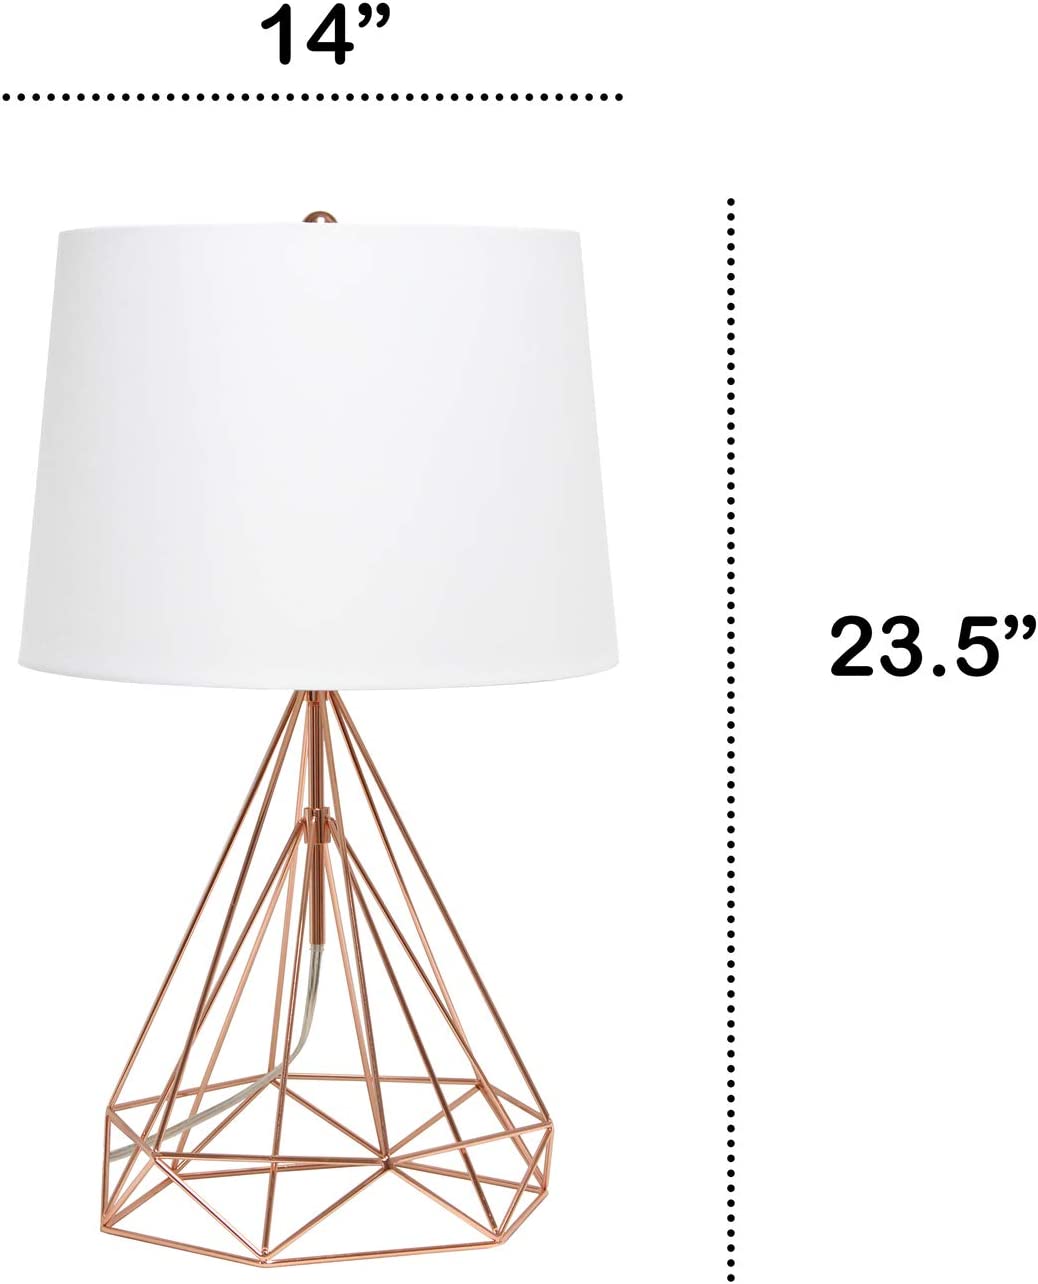 Lalia Home Decorative Table Lamp with Geometric Rose Gold Wired Base and White Fabric Tapered Shade